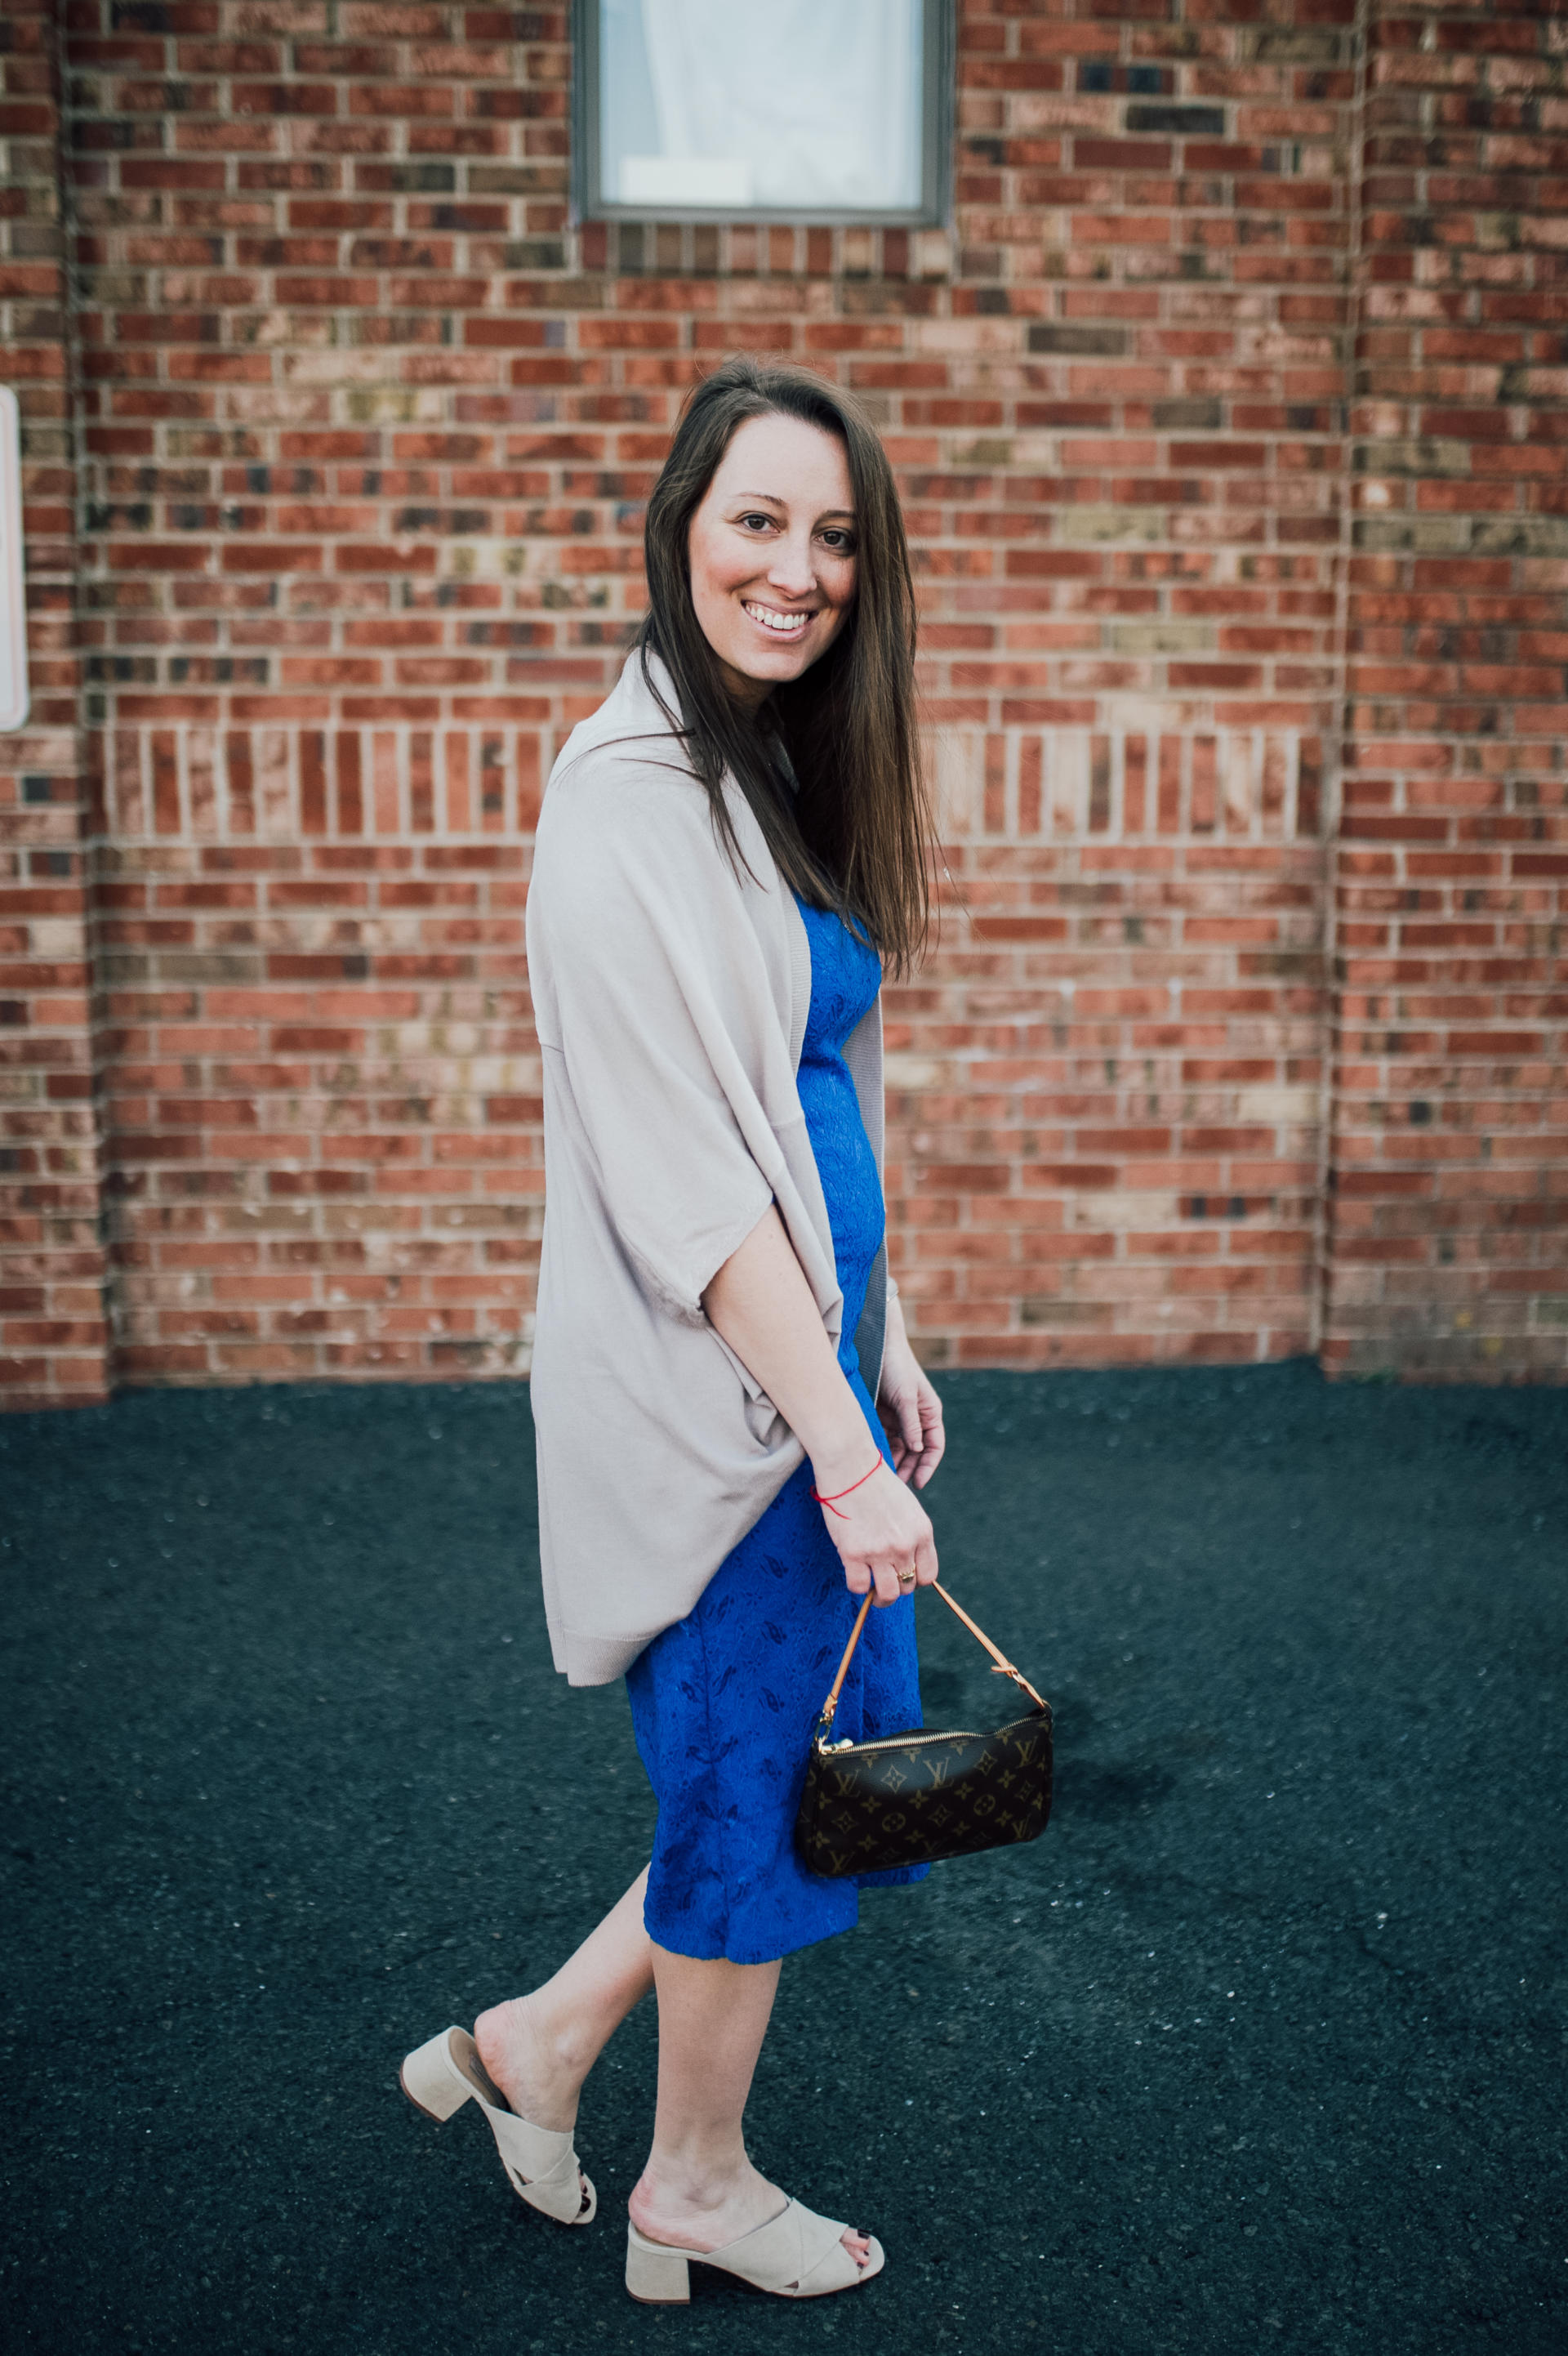 STYLE: Blue Lace Dress with Pink Blush by New Jersey fashion blogger What's For Dinner Esq.